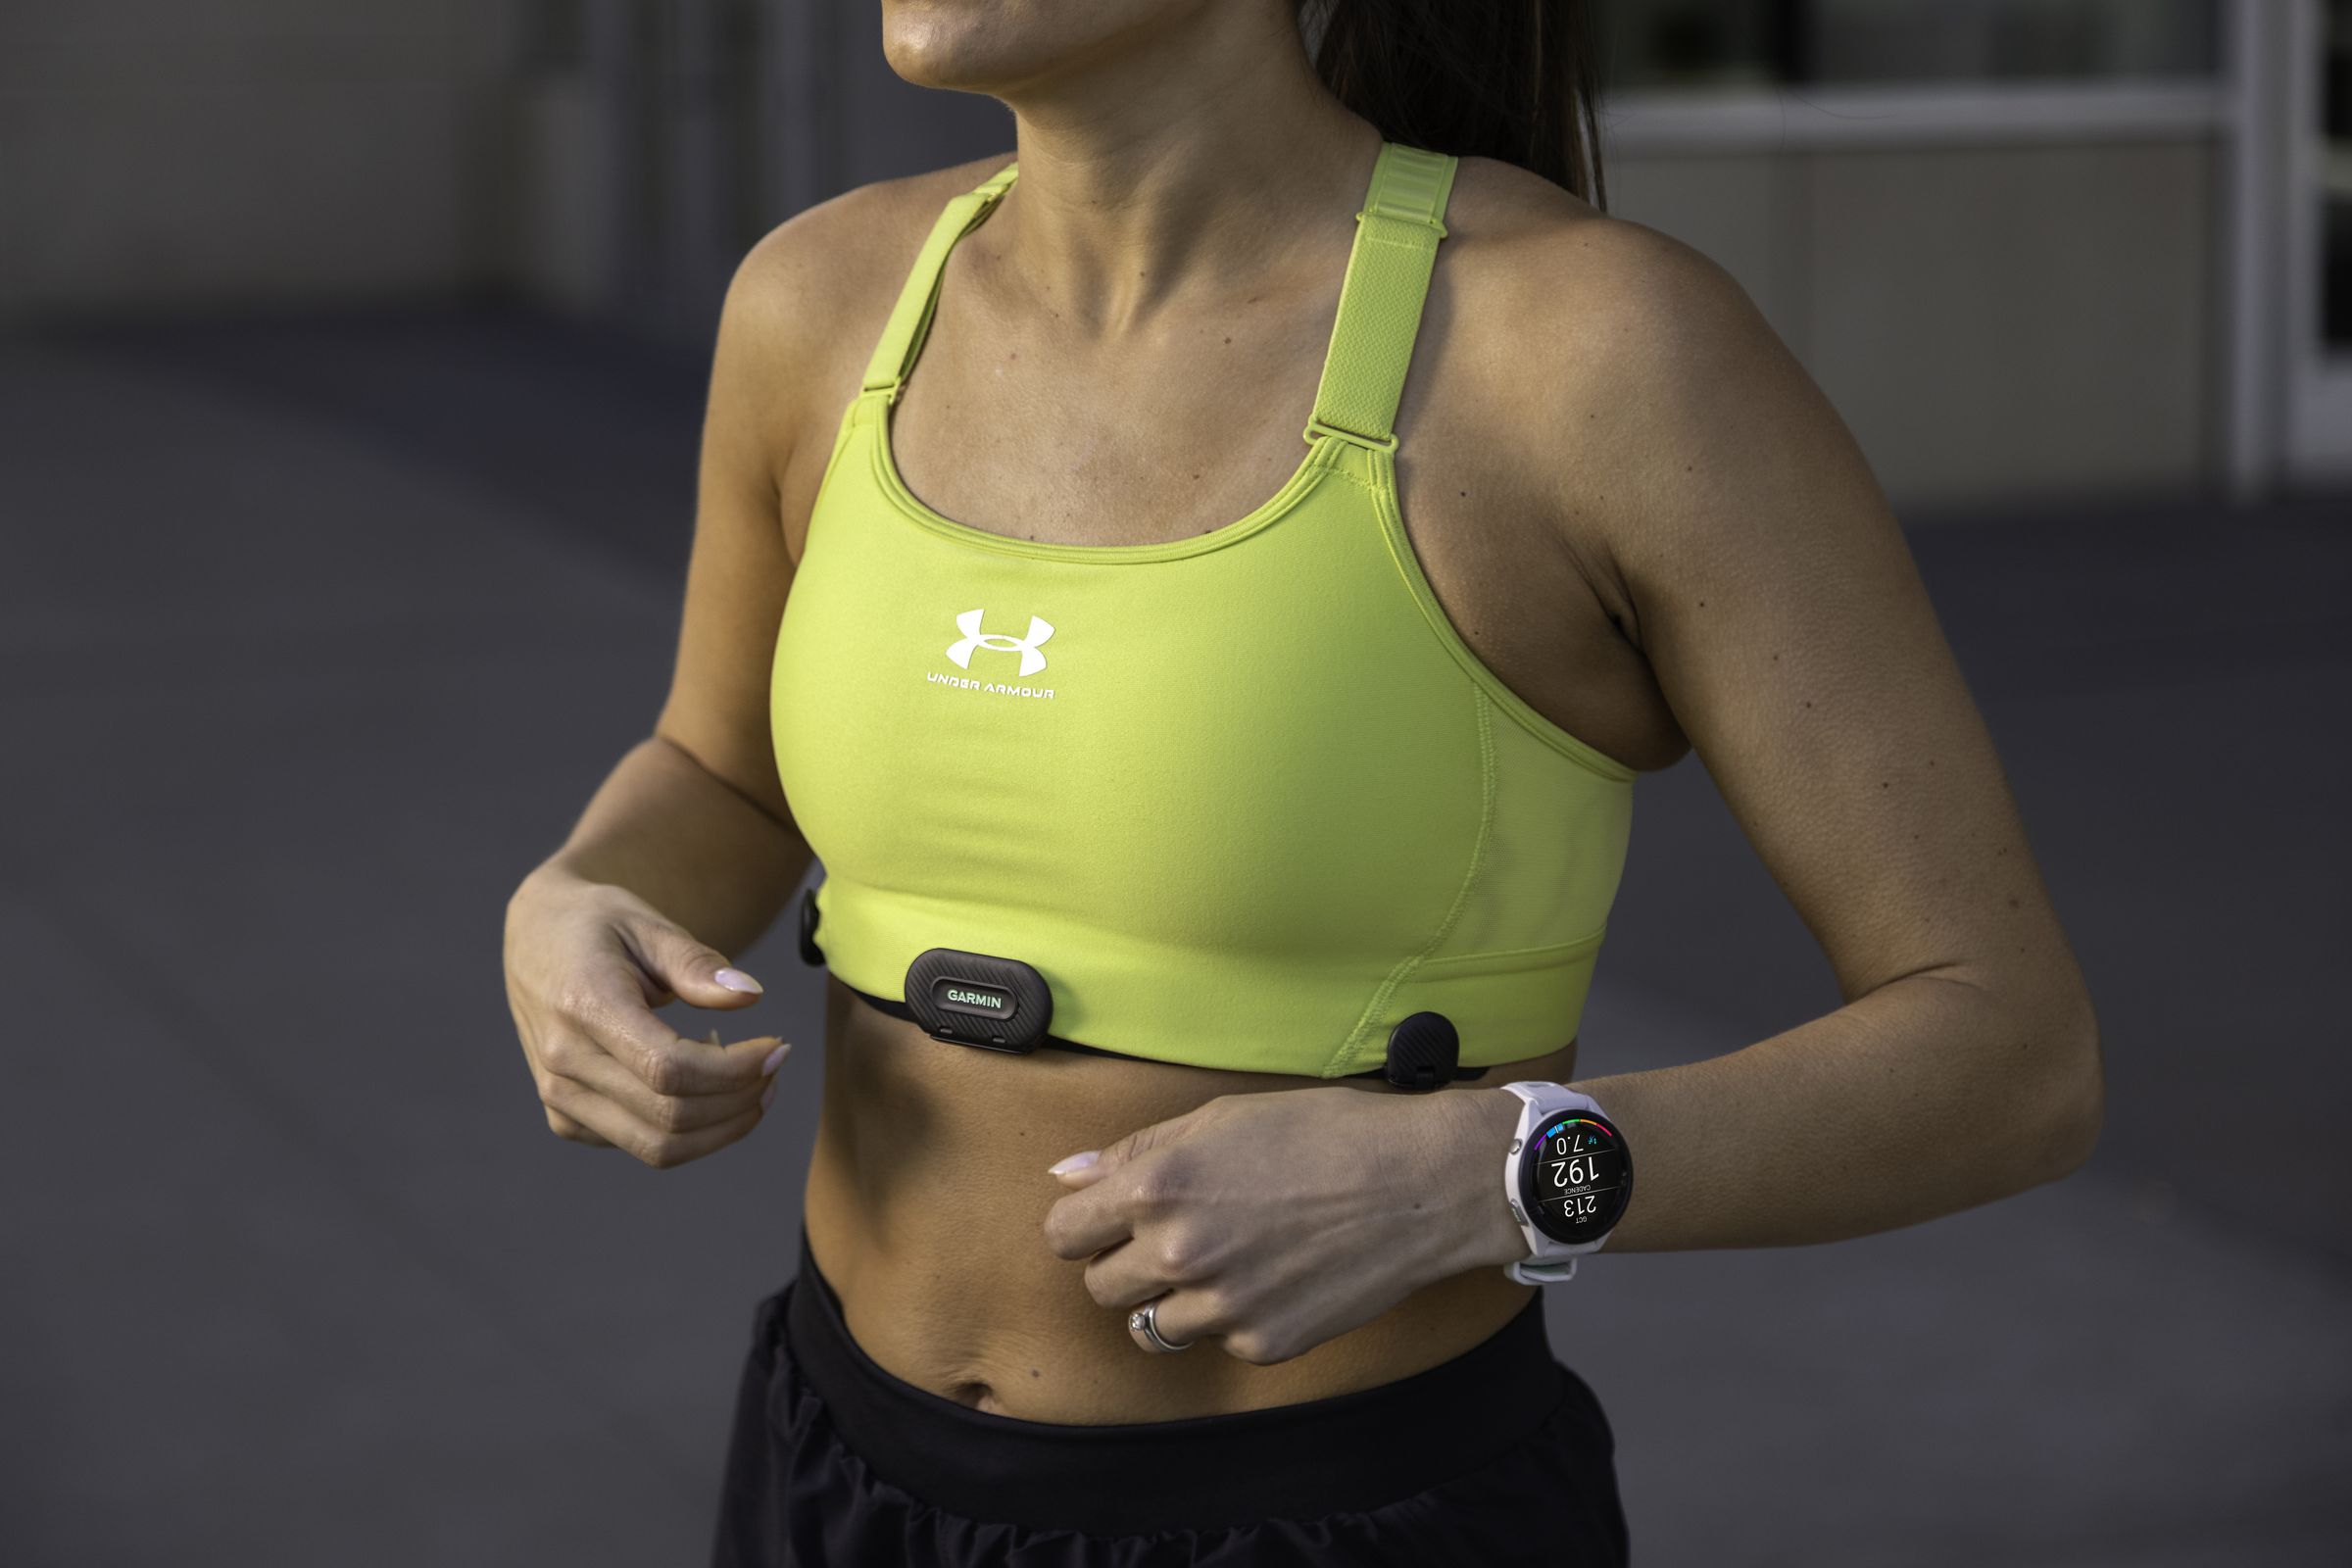 Woman modeling Garmin HRM-Fit chest strap, which clips onto the bottom of sports bras.